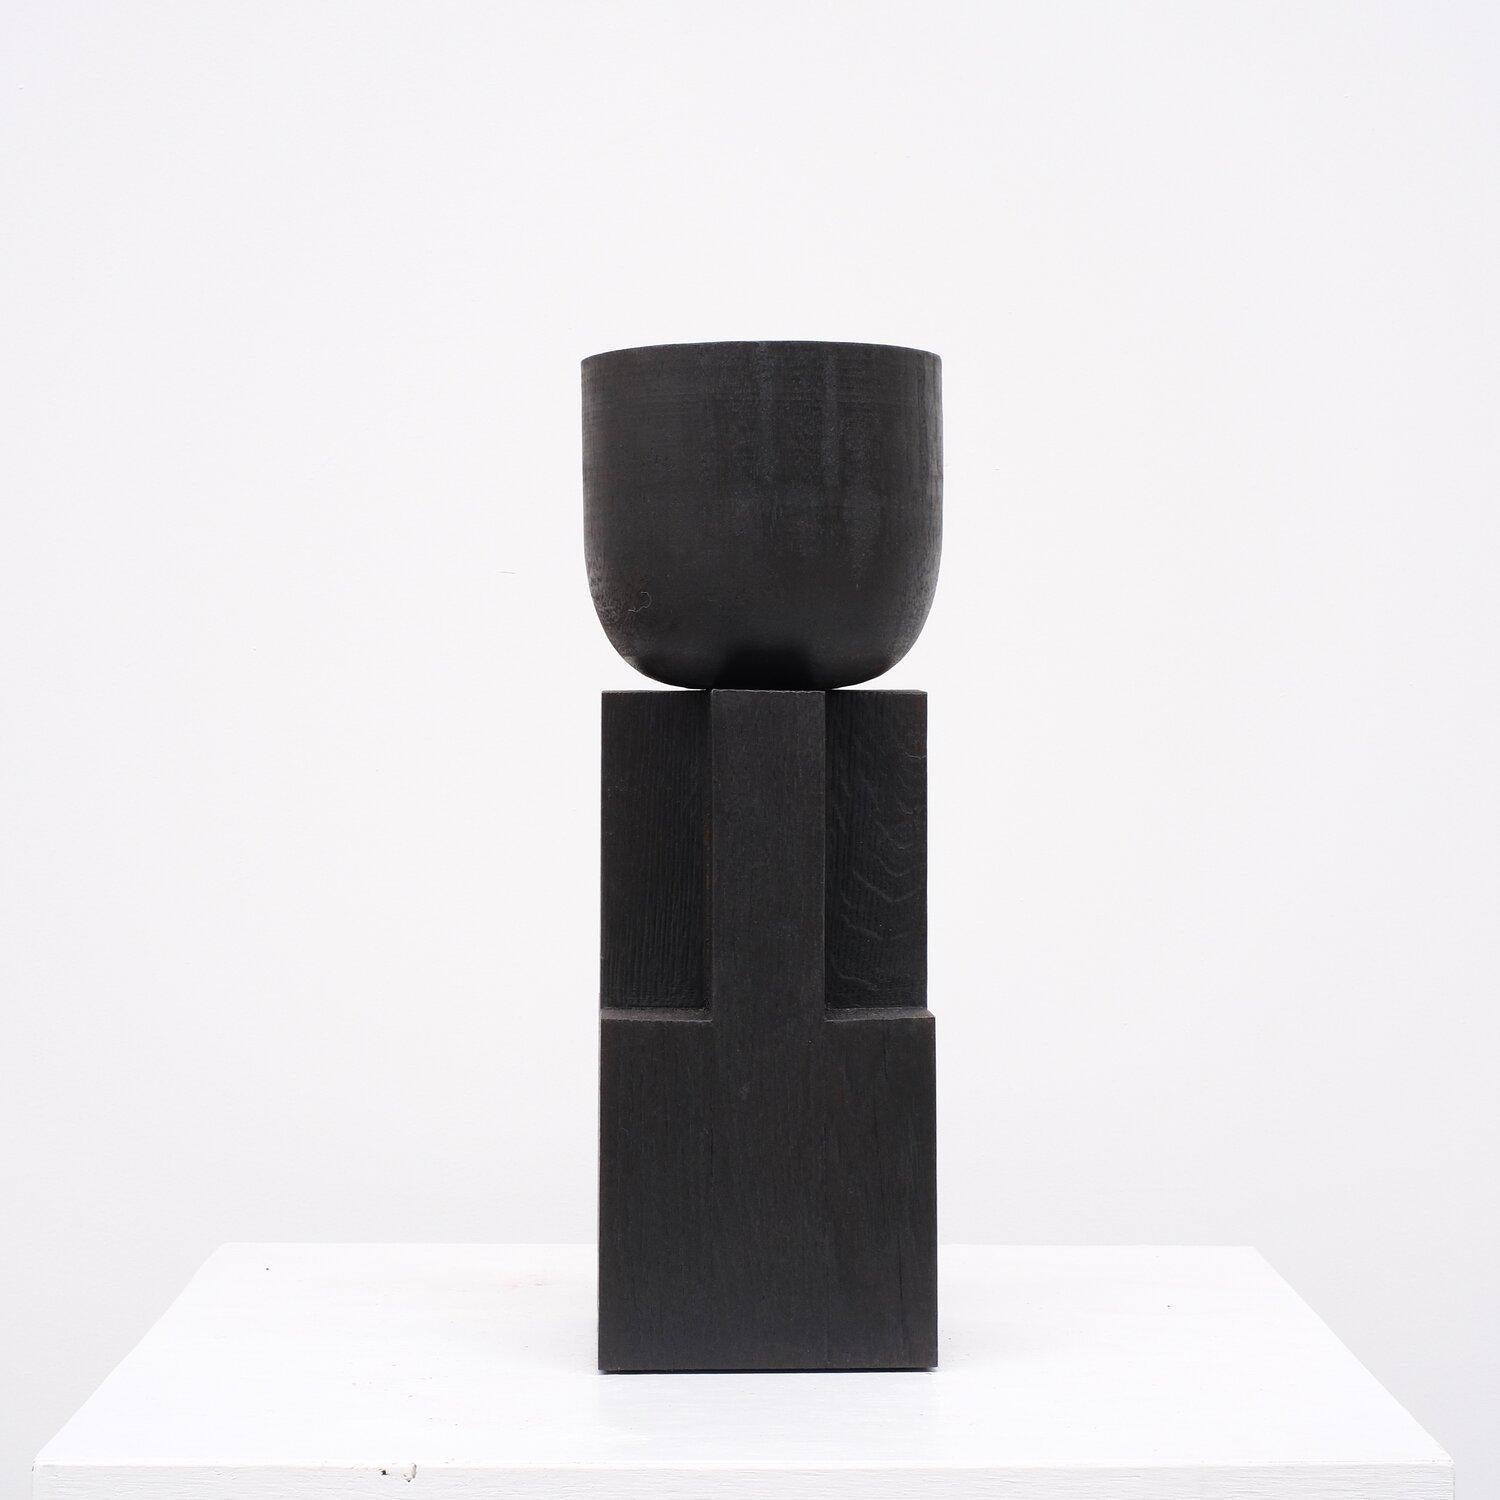 Contemporary Black Bowl in Iroko Wood, Goblet Bowl by Arno Declercq

Material: Burned Iroko Wood and Oak
Dimensions: Dimensions: 40 cm H x 14 cm W x 14 cm D

Made by hand, in Belgium.

Arno Declercq
Belgian designer and art dealer who makes